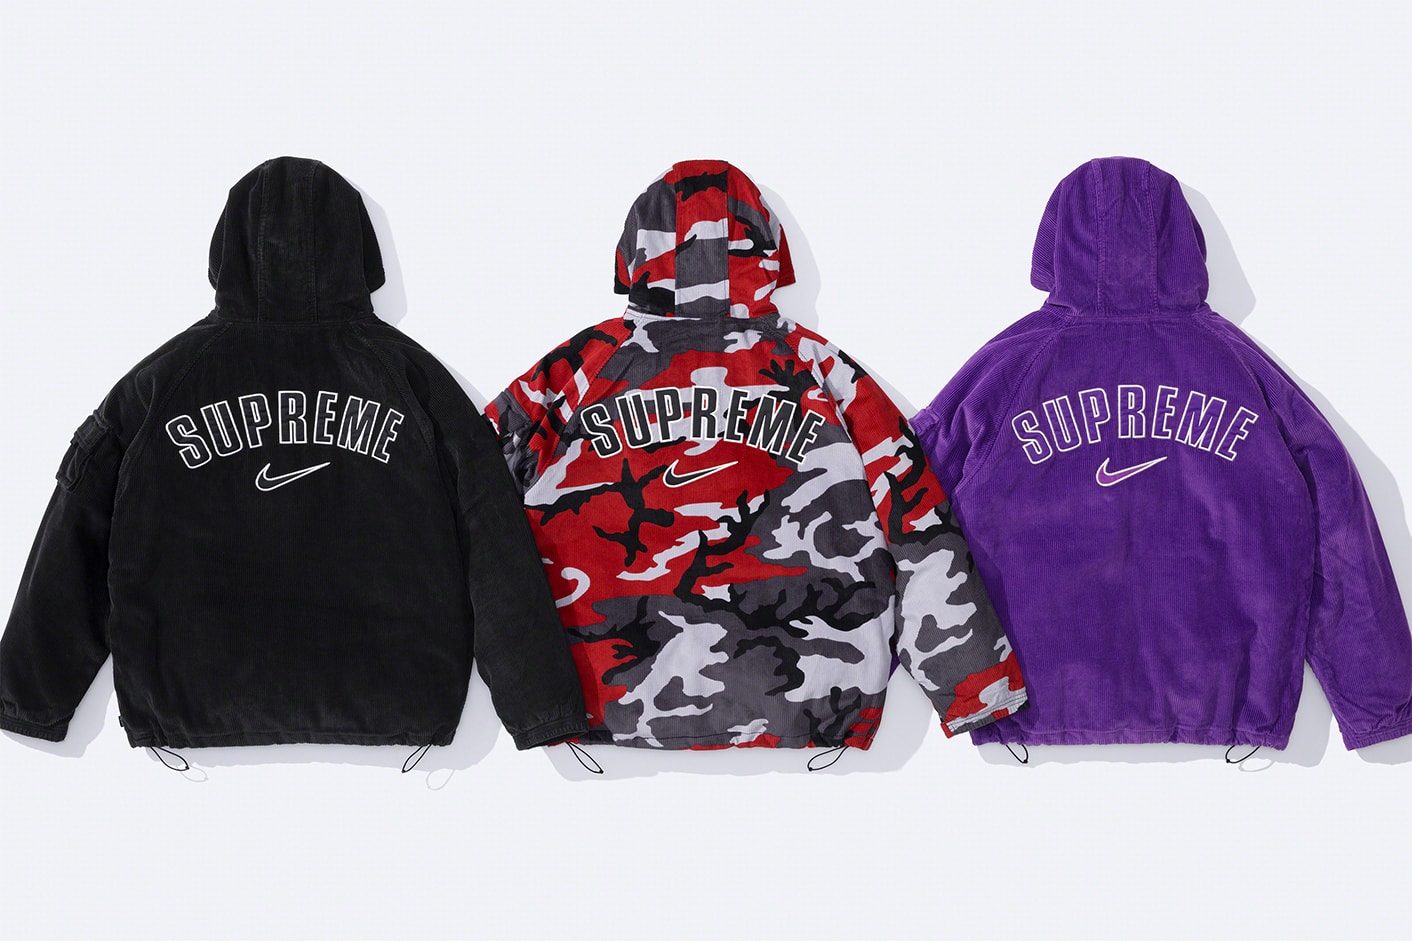 Here Are the Official Release Details for the Latest Supreme x